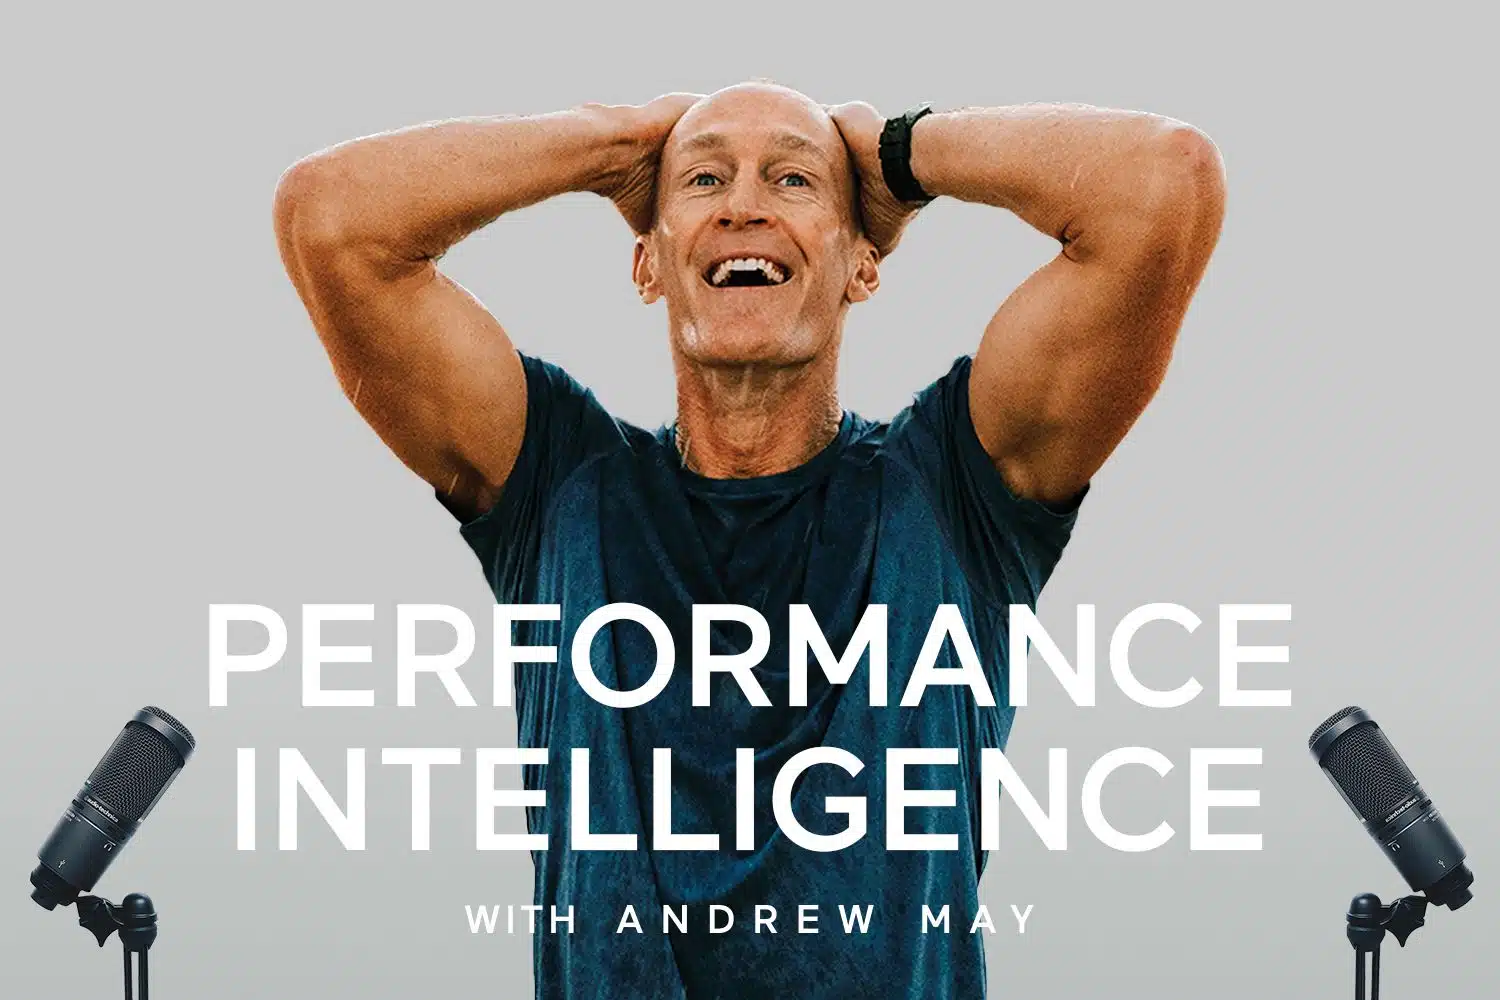 Top 5 Performance Intelligence Episodes of 2022 with Andrew May